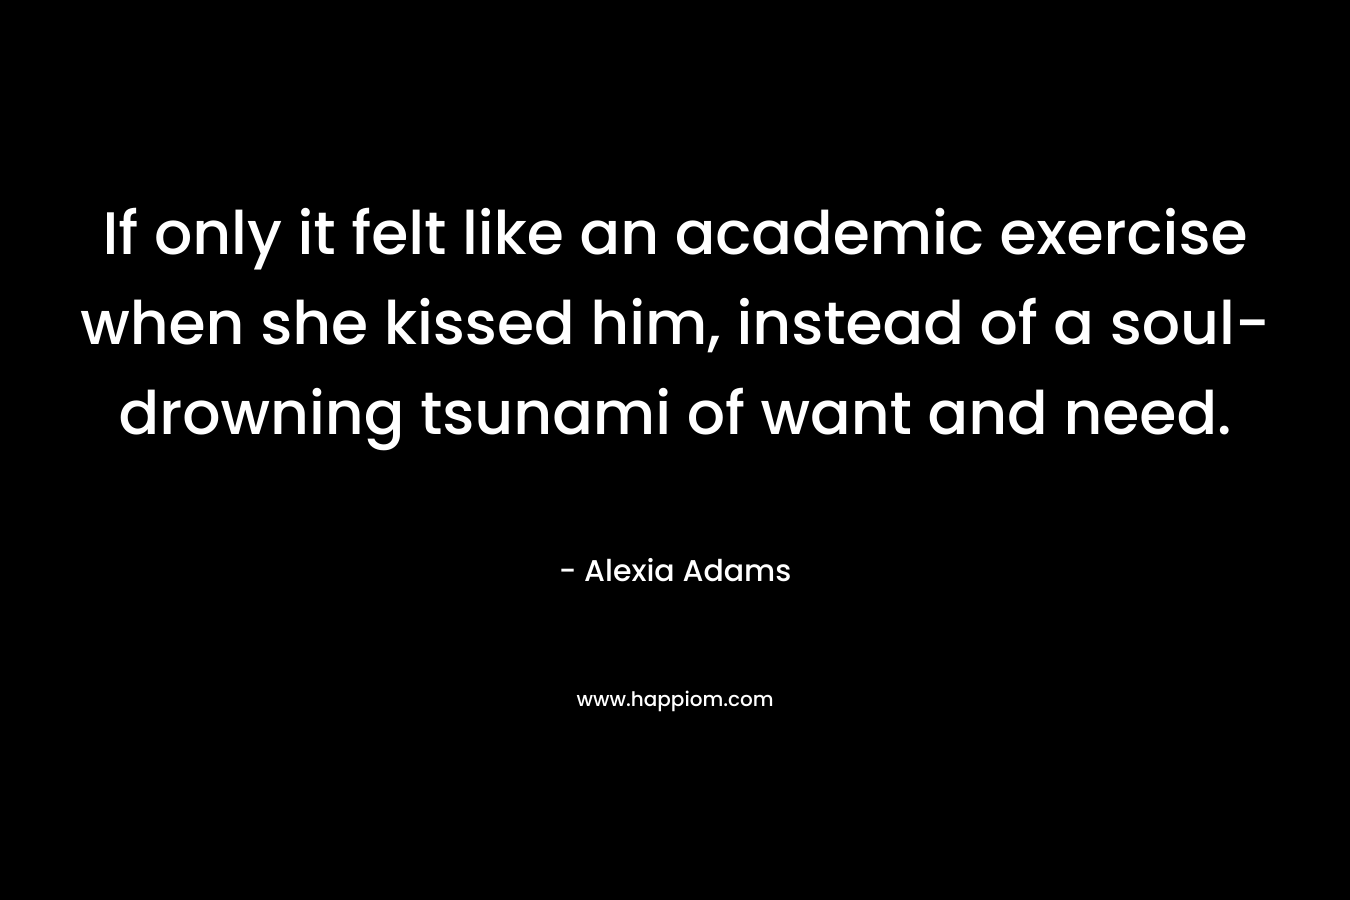 If only it felt like an academic exercise when she kissed him, instead of a soul-drowning tsunami of want and need. – Alexia Adams